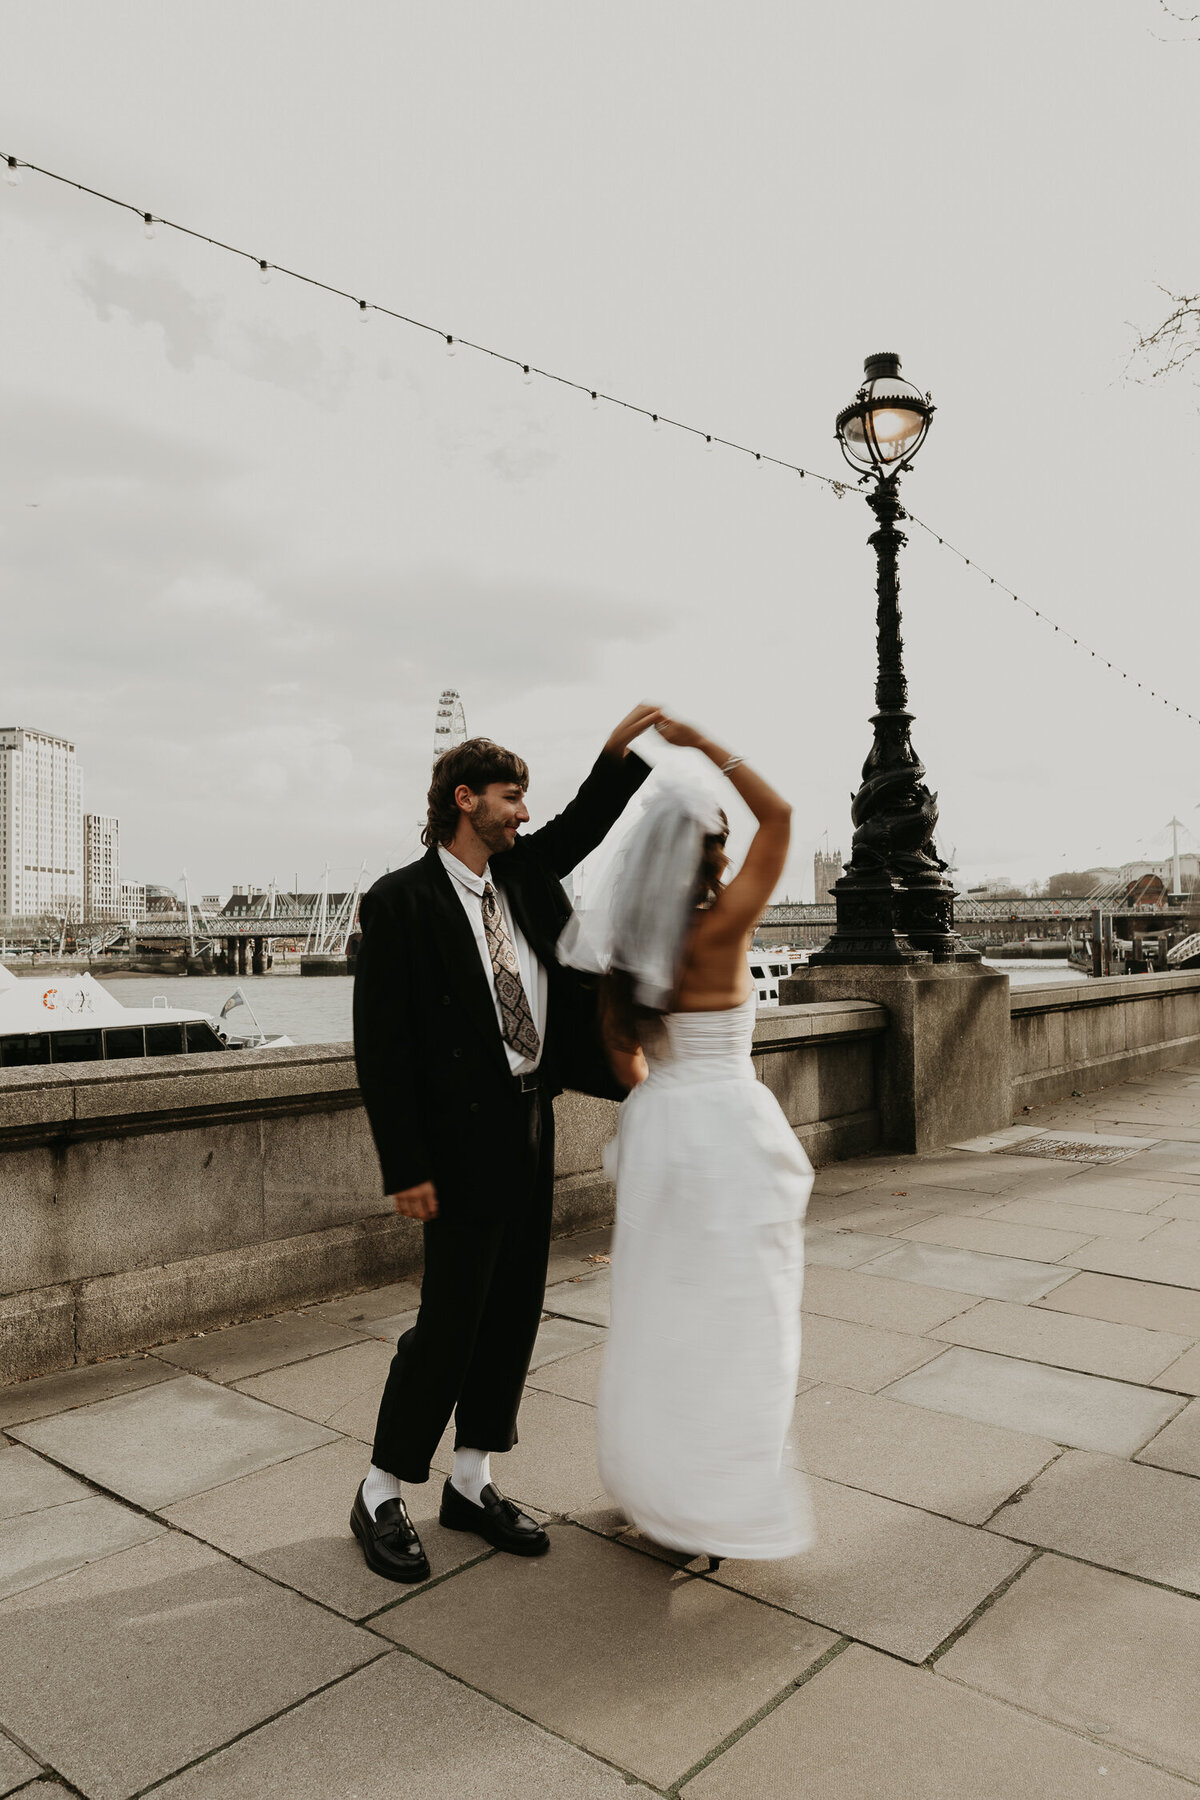 A couple dance on the river Thames on their wedding day.